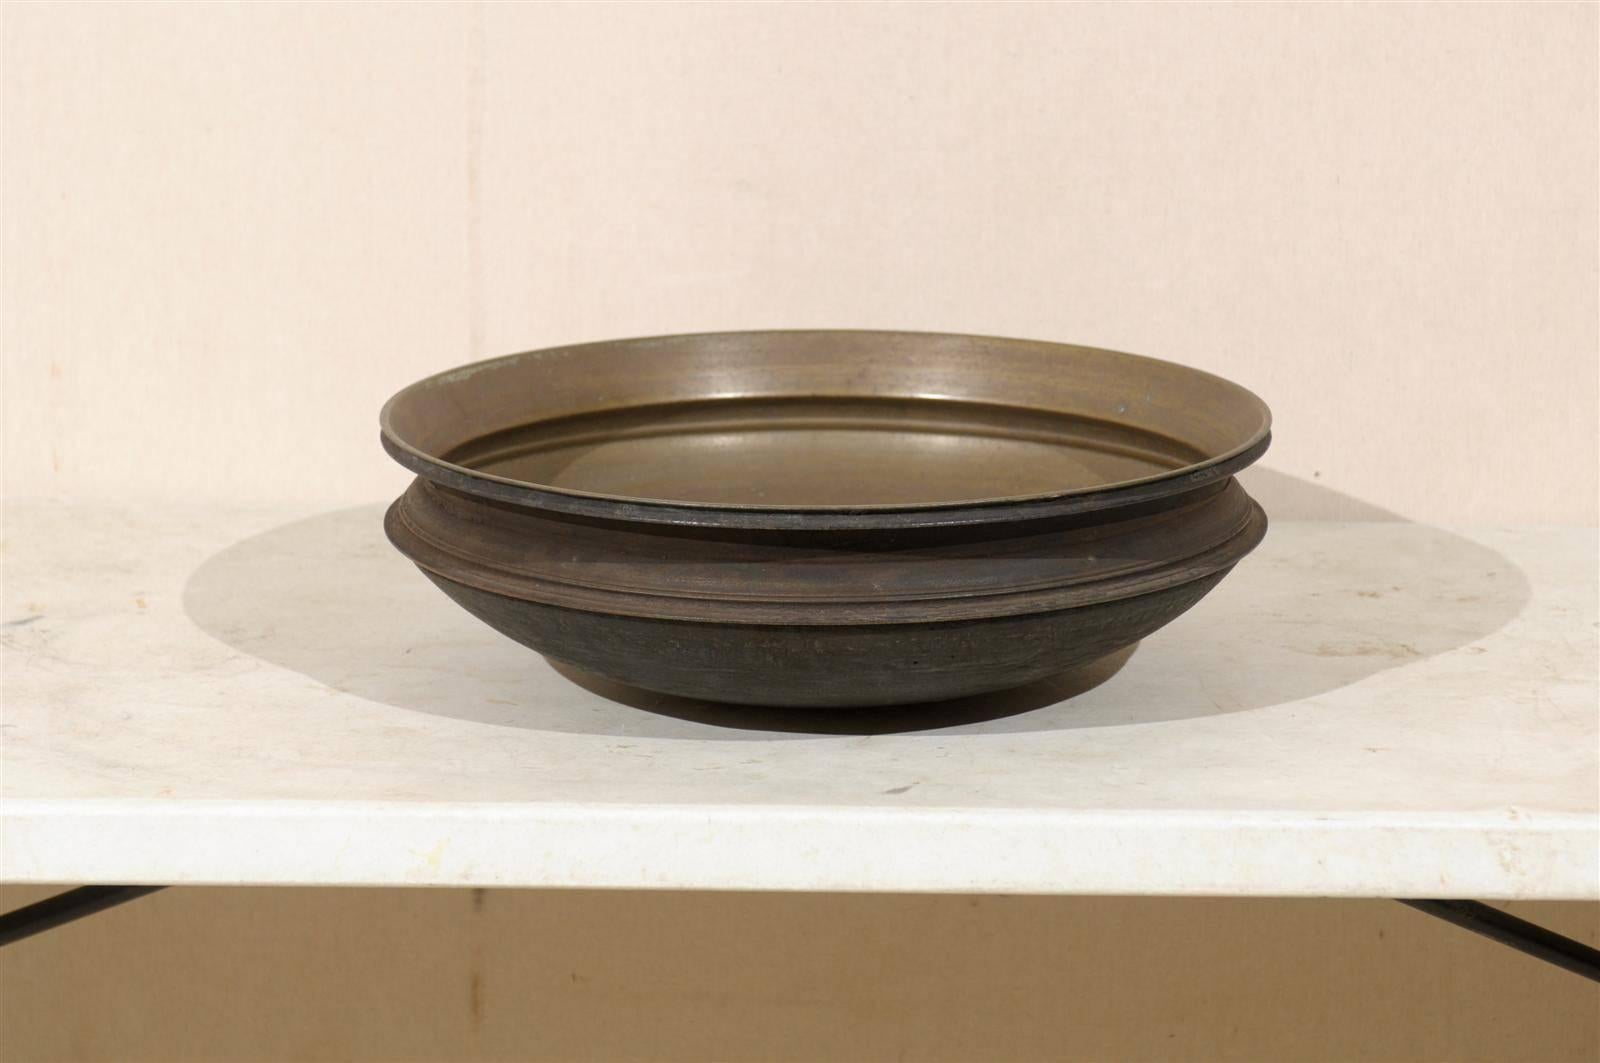 A bronze Uruli round shaped cooking bowl from South India. An Uruli is a traditional cookware extensively used is South India. Urulis were used in homes for cooking and in ayurvedha to take medicines. Nowadays, Urulis are used as a decorative bowl